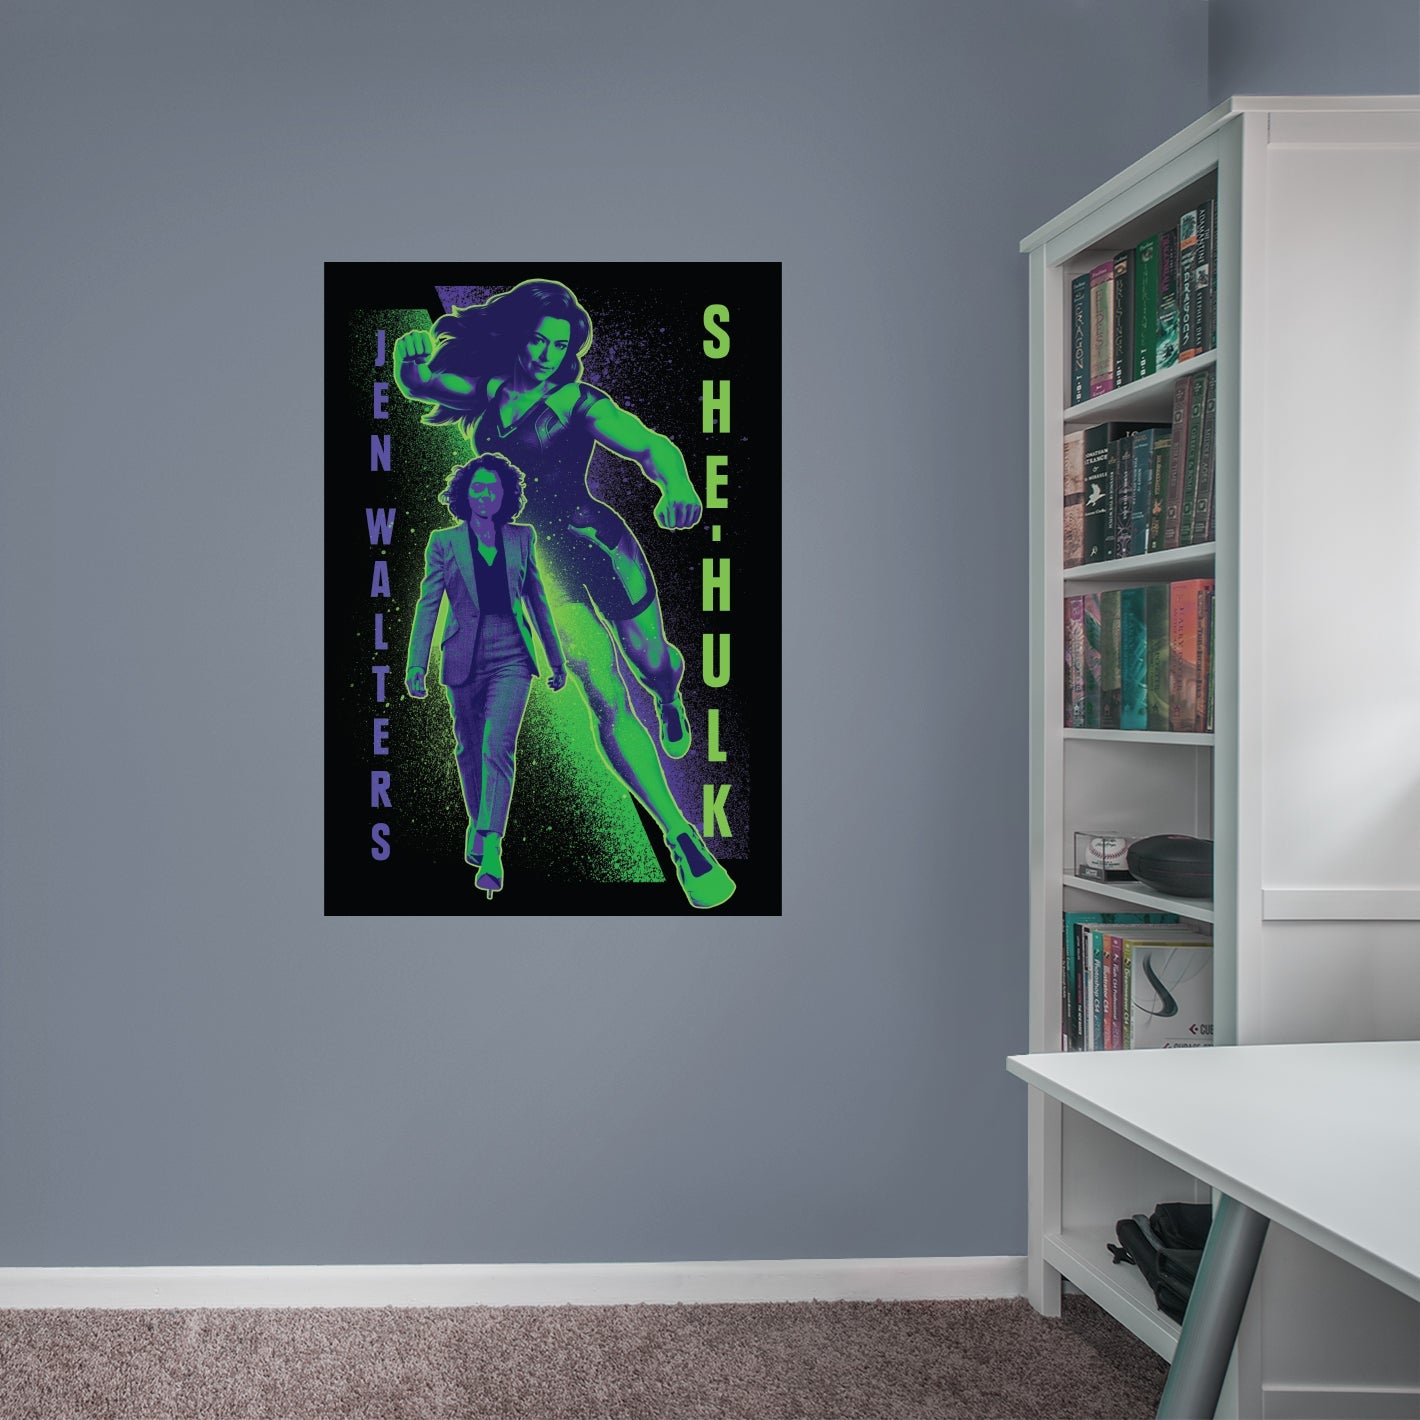 She-Hulk: She-Hulk Alter Ego Mural - Officially Licensed Marvel Removable Adhesive Decal